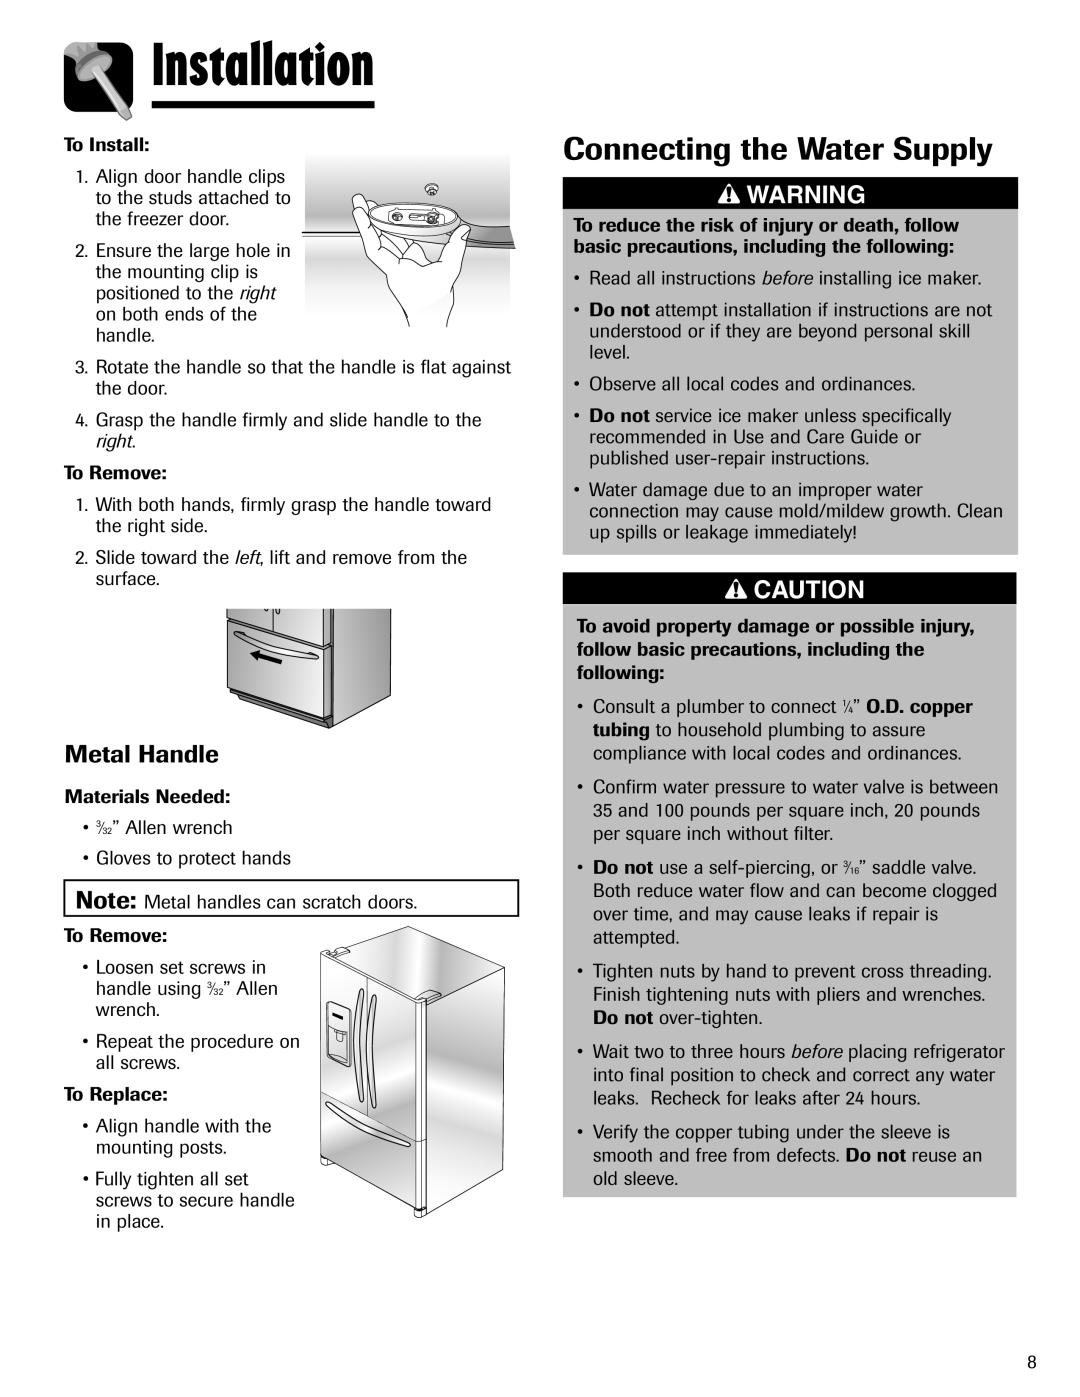 Maytag MFI2266AEW important safety instructions Connecting the Water Supply, Metal Handle, Installation 